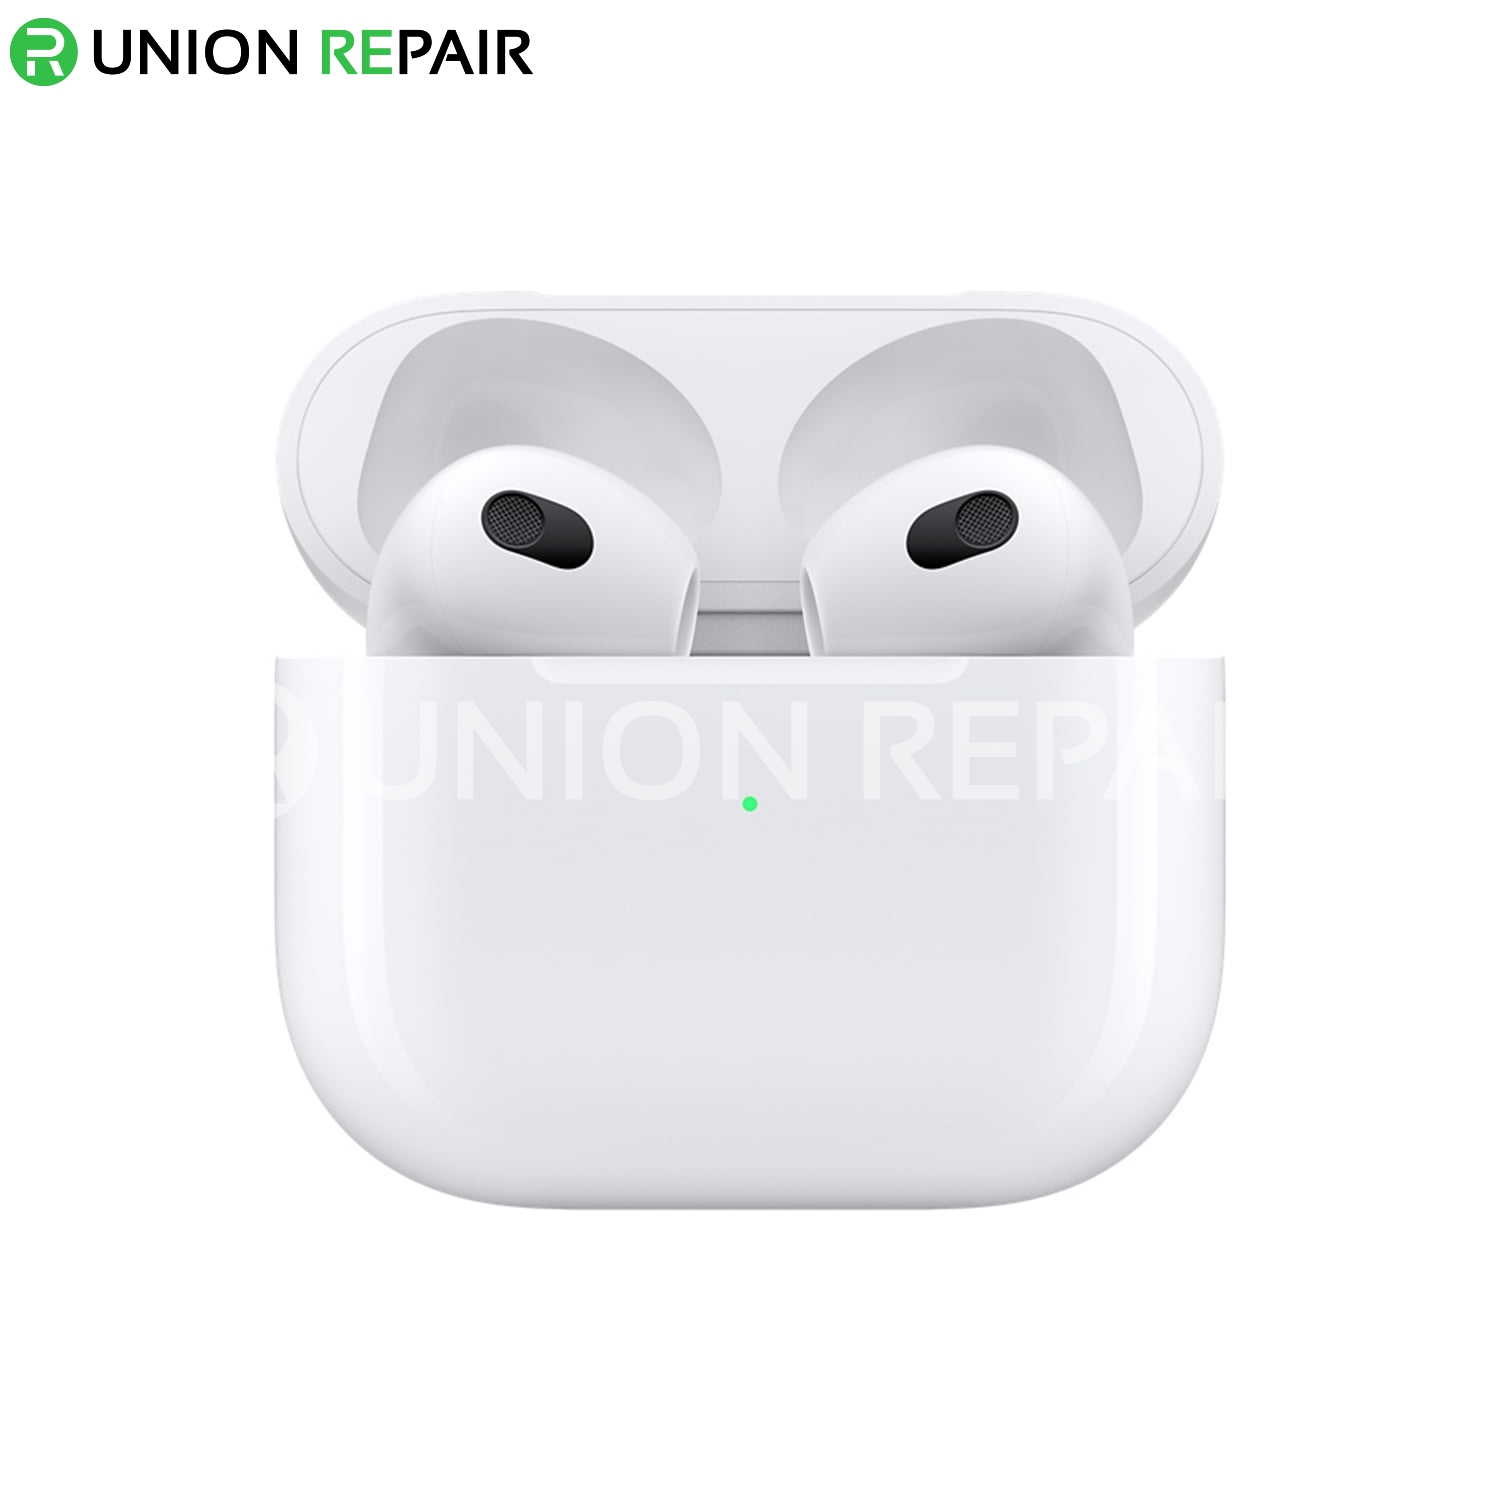 Wireless Headphones for Apple Airpods (3rd generation)